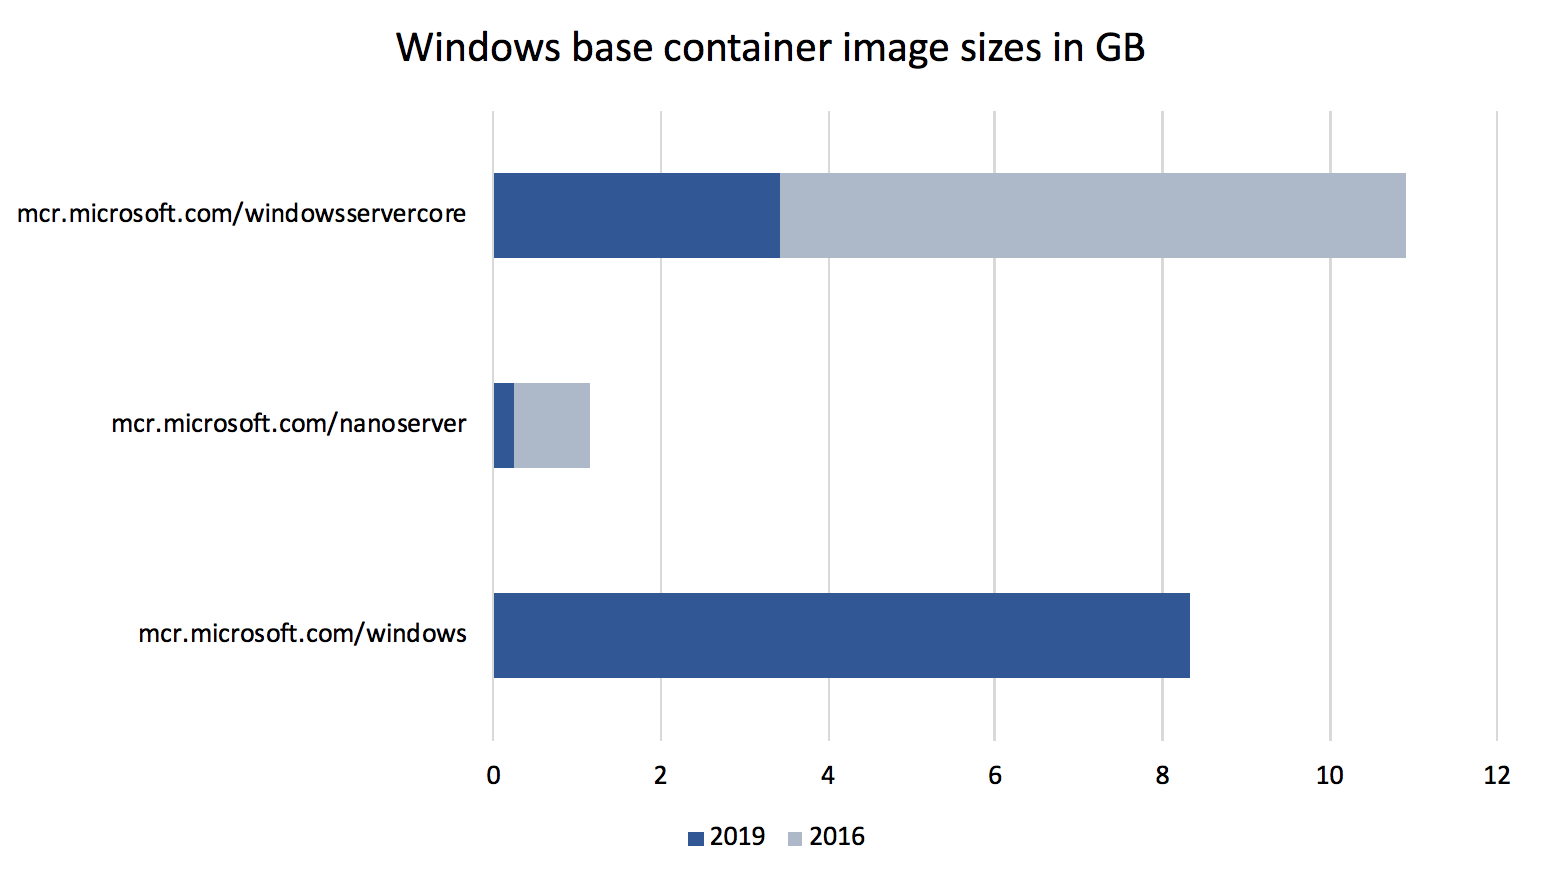 Comparison of Docker image sizes for 2016 and 2019